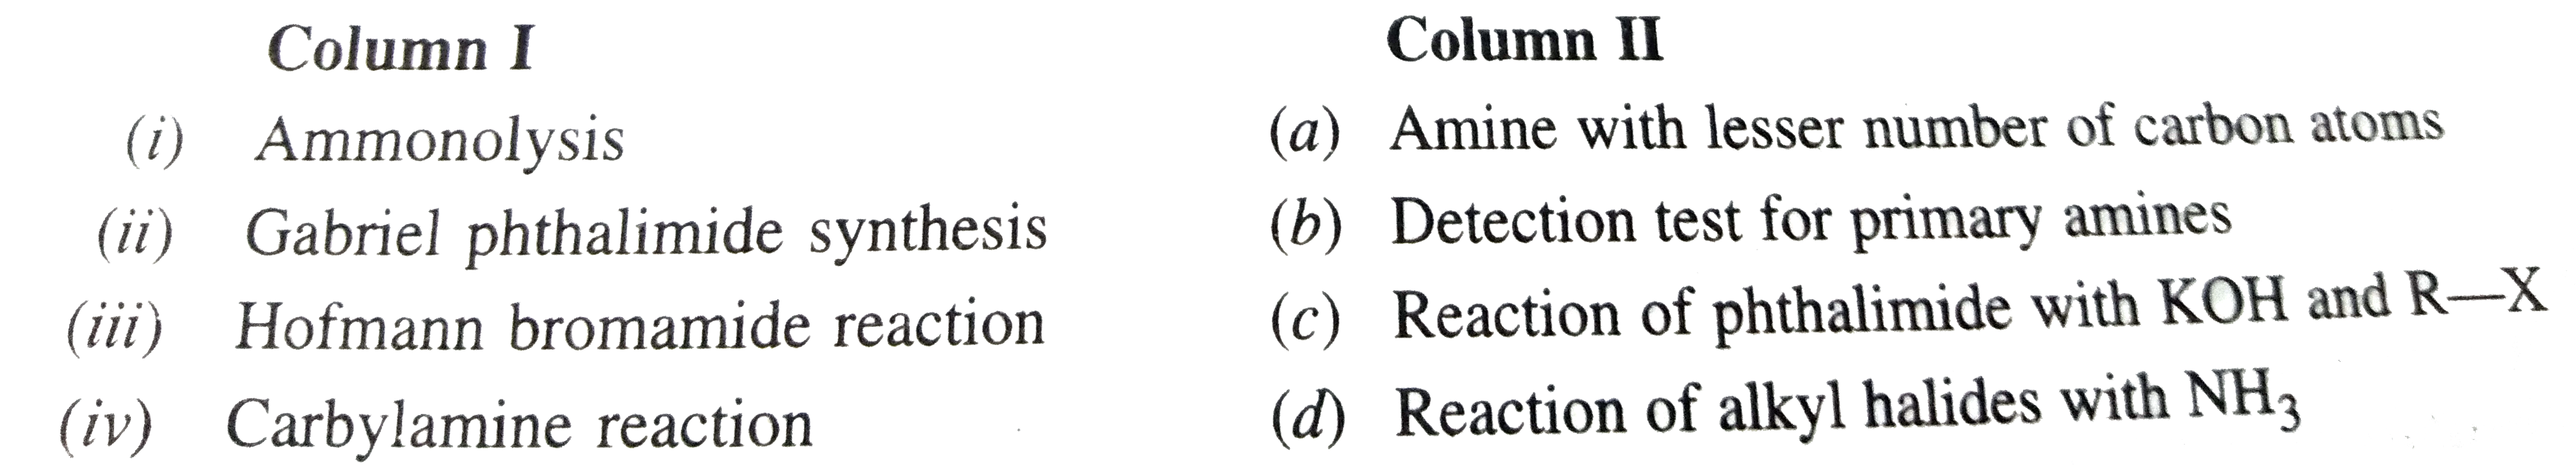 Match the reaction gives in Column I with the statements given in Column II.